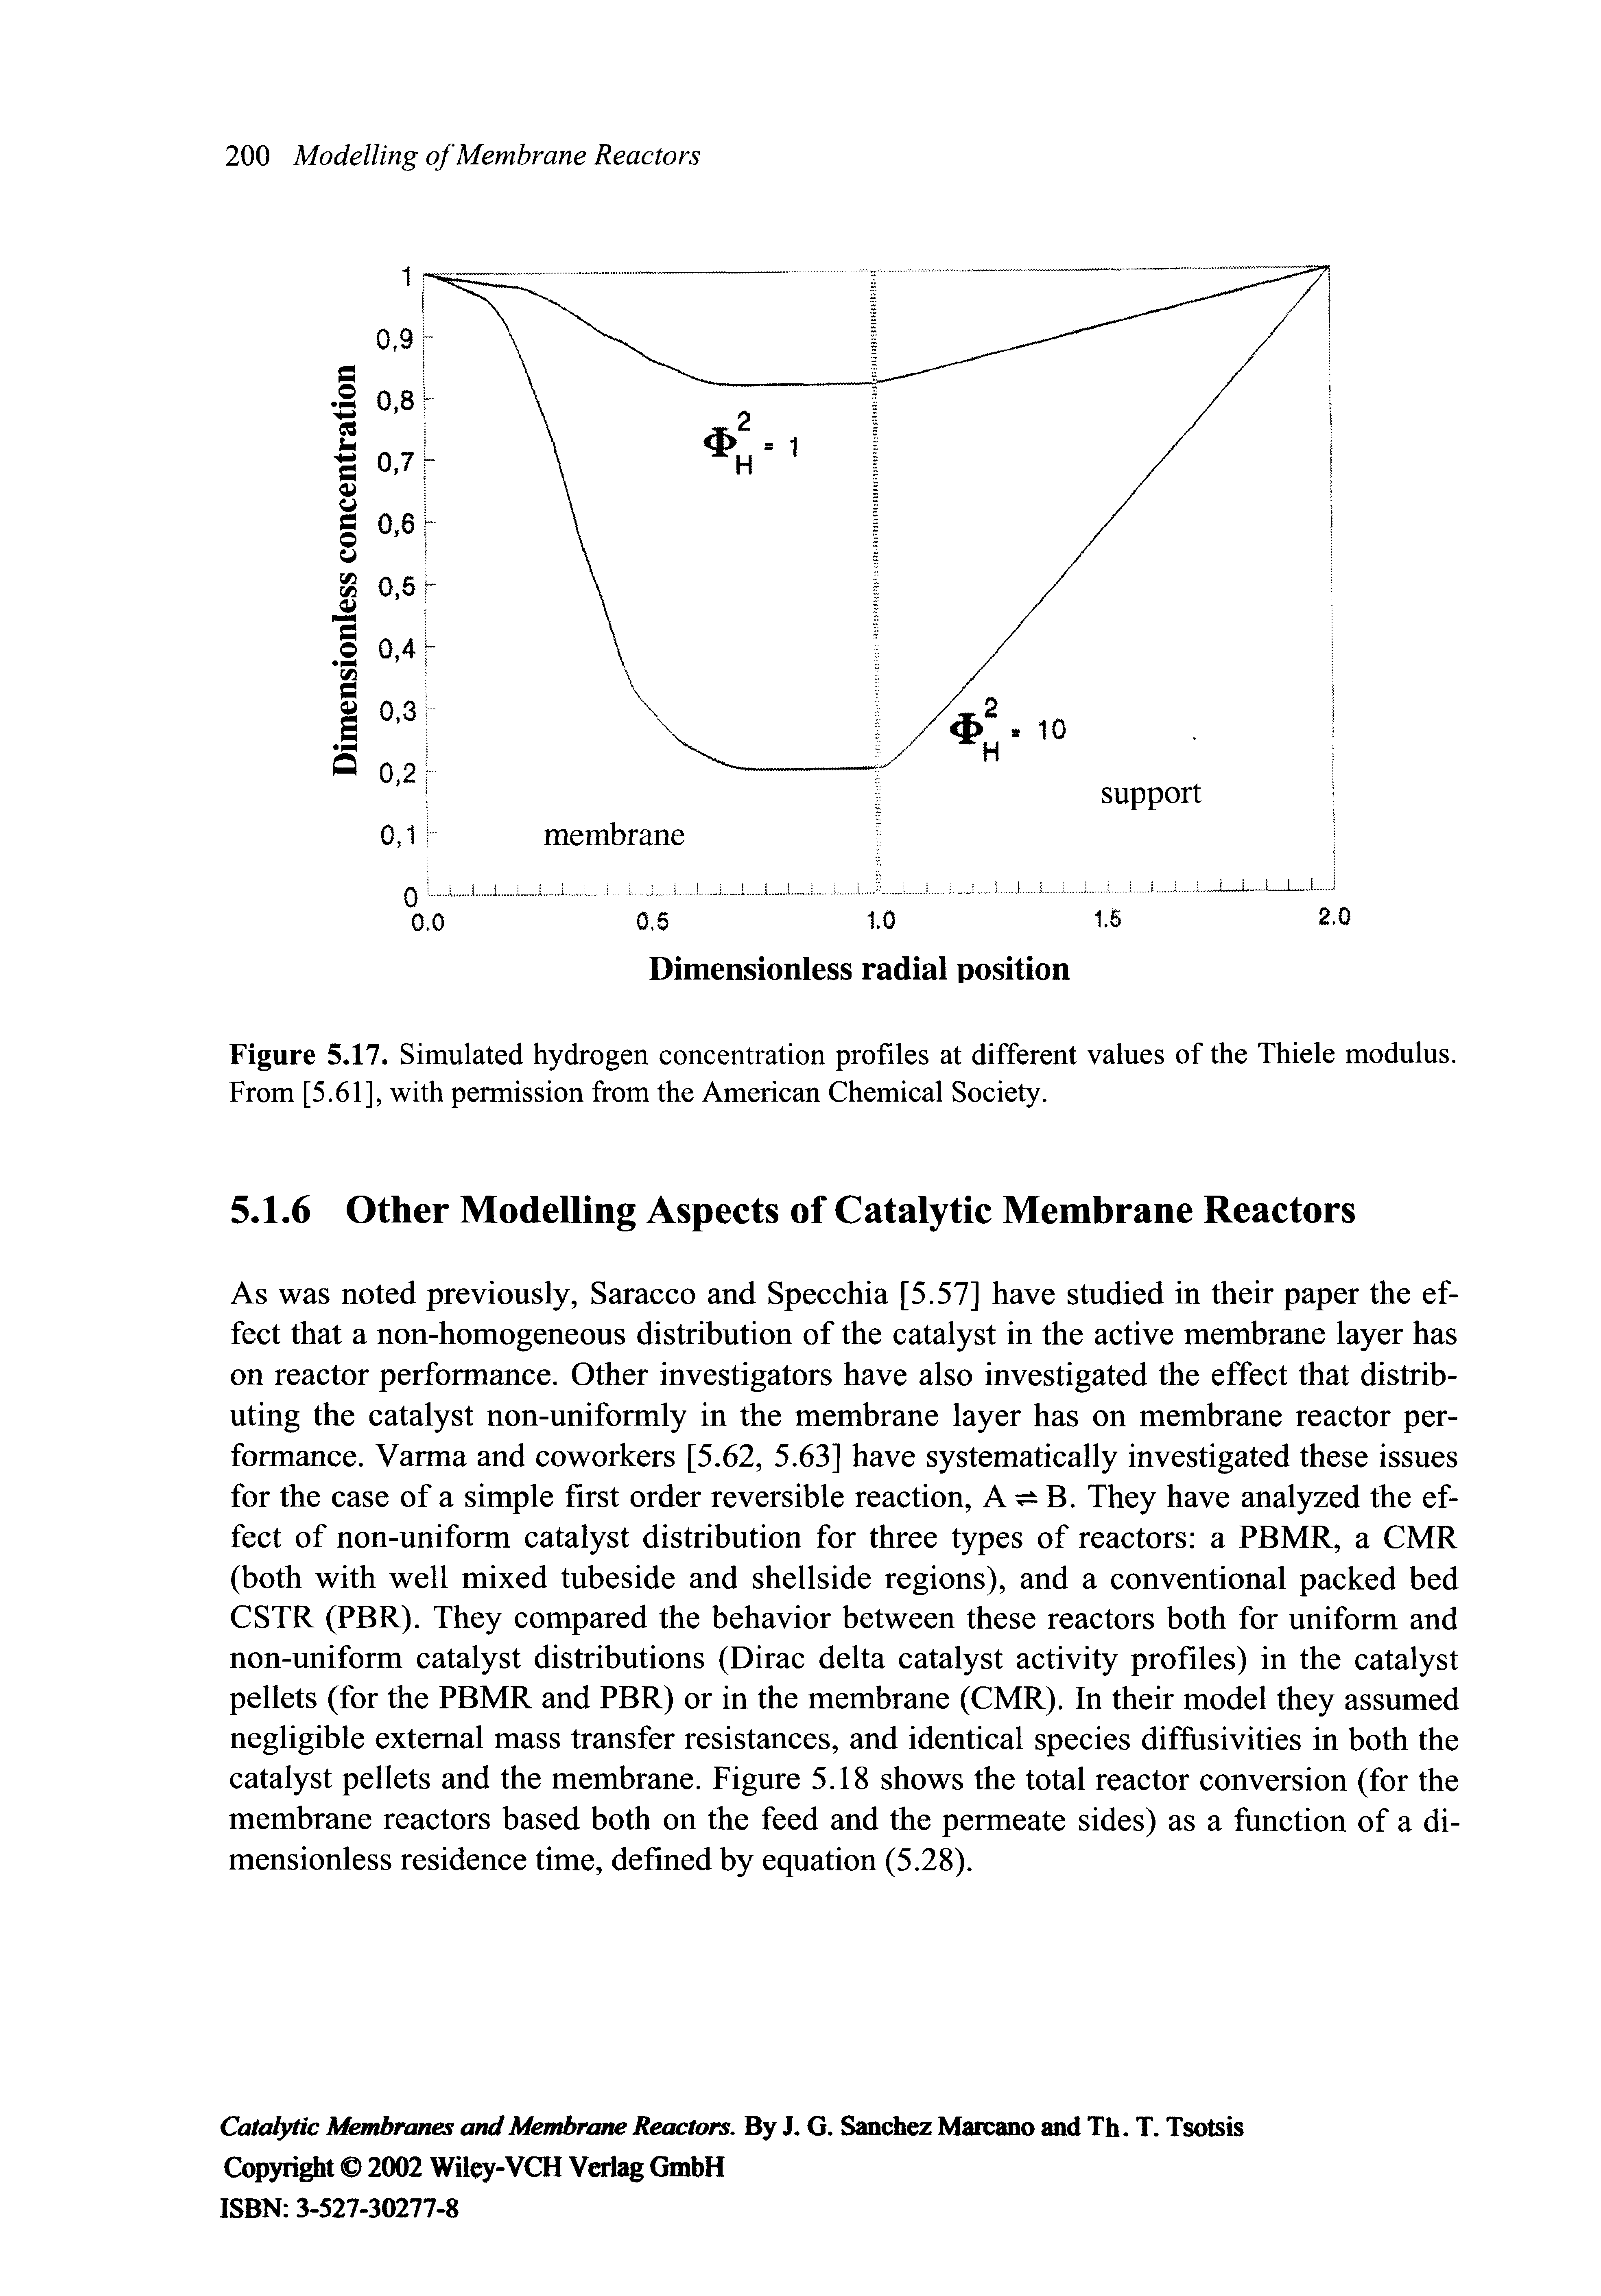 Figure 5.17. Simulated hydrogen concentration profiles at different values of the Thiele modulus. From [5.61], with permission from the American Chemical Society.